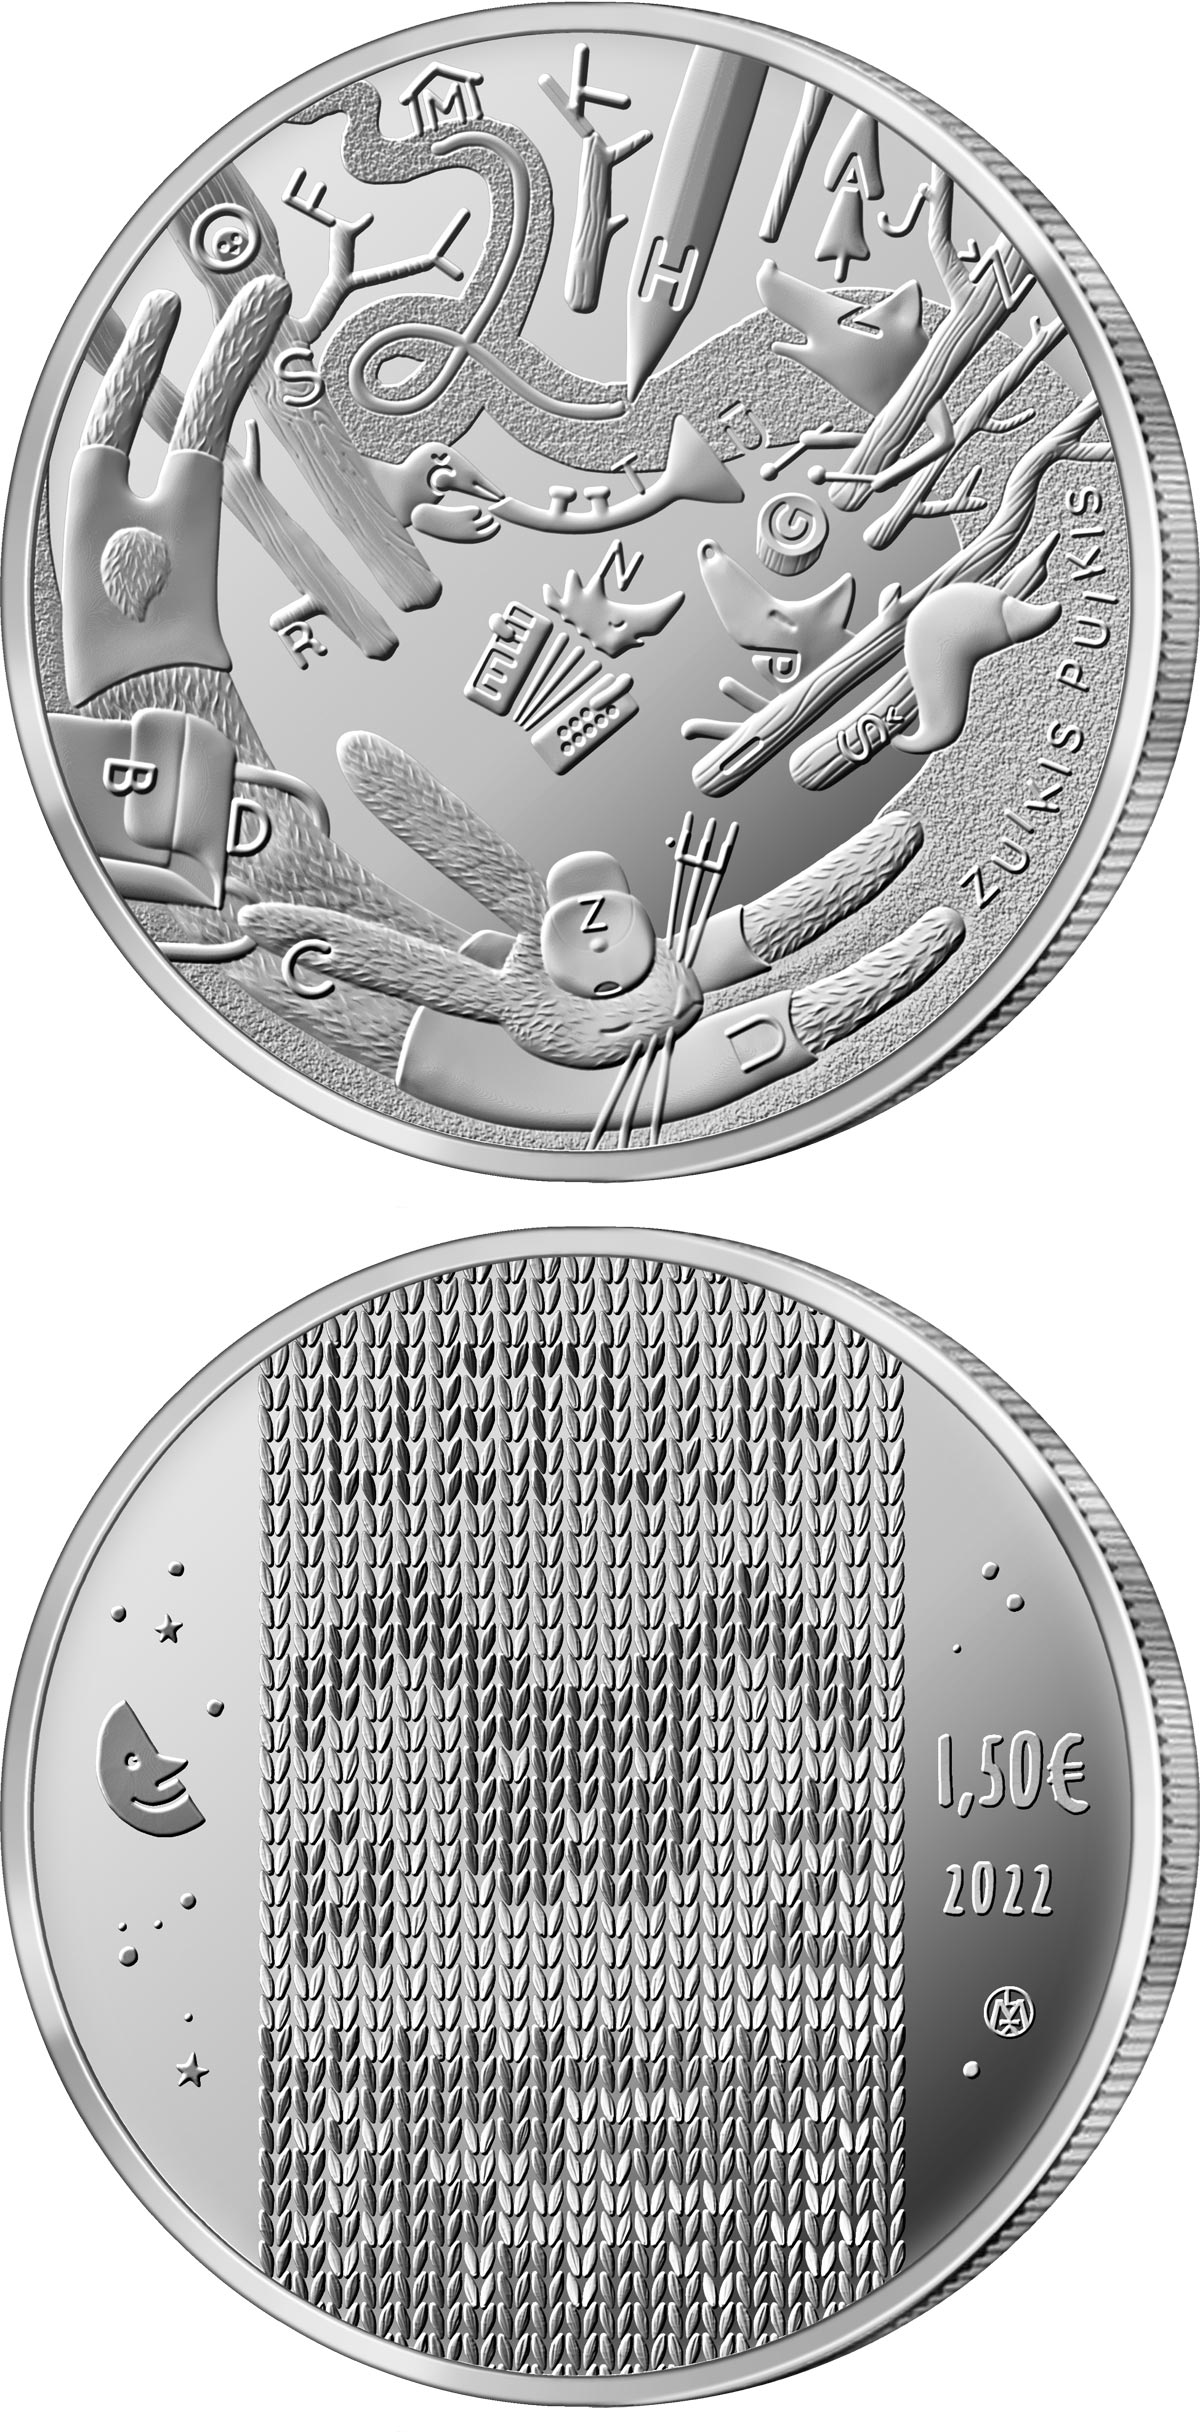 Image of 1.5 euro coin - Zuikis Puikis | Lithuania 2022.  The Copper–Nickel (CuNi) coin is of UNC quality.